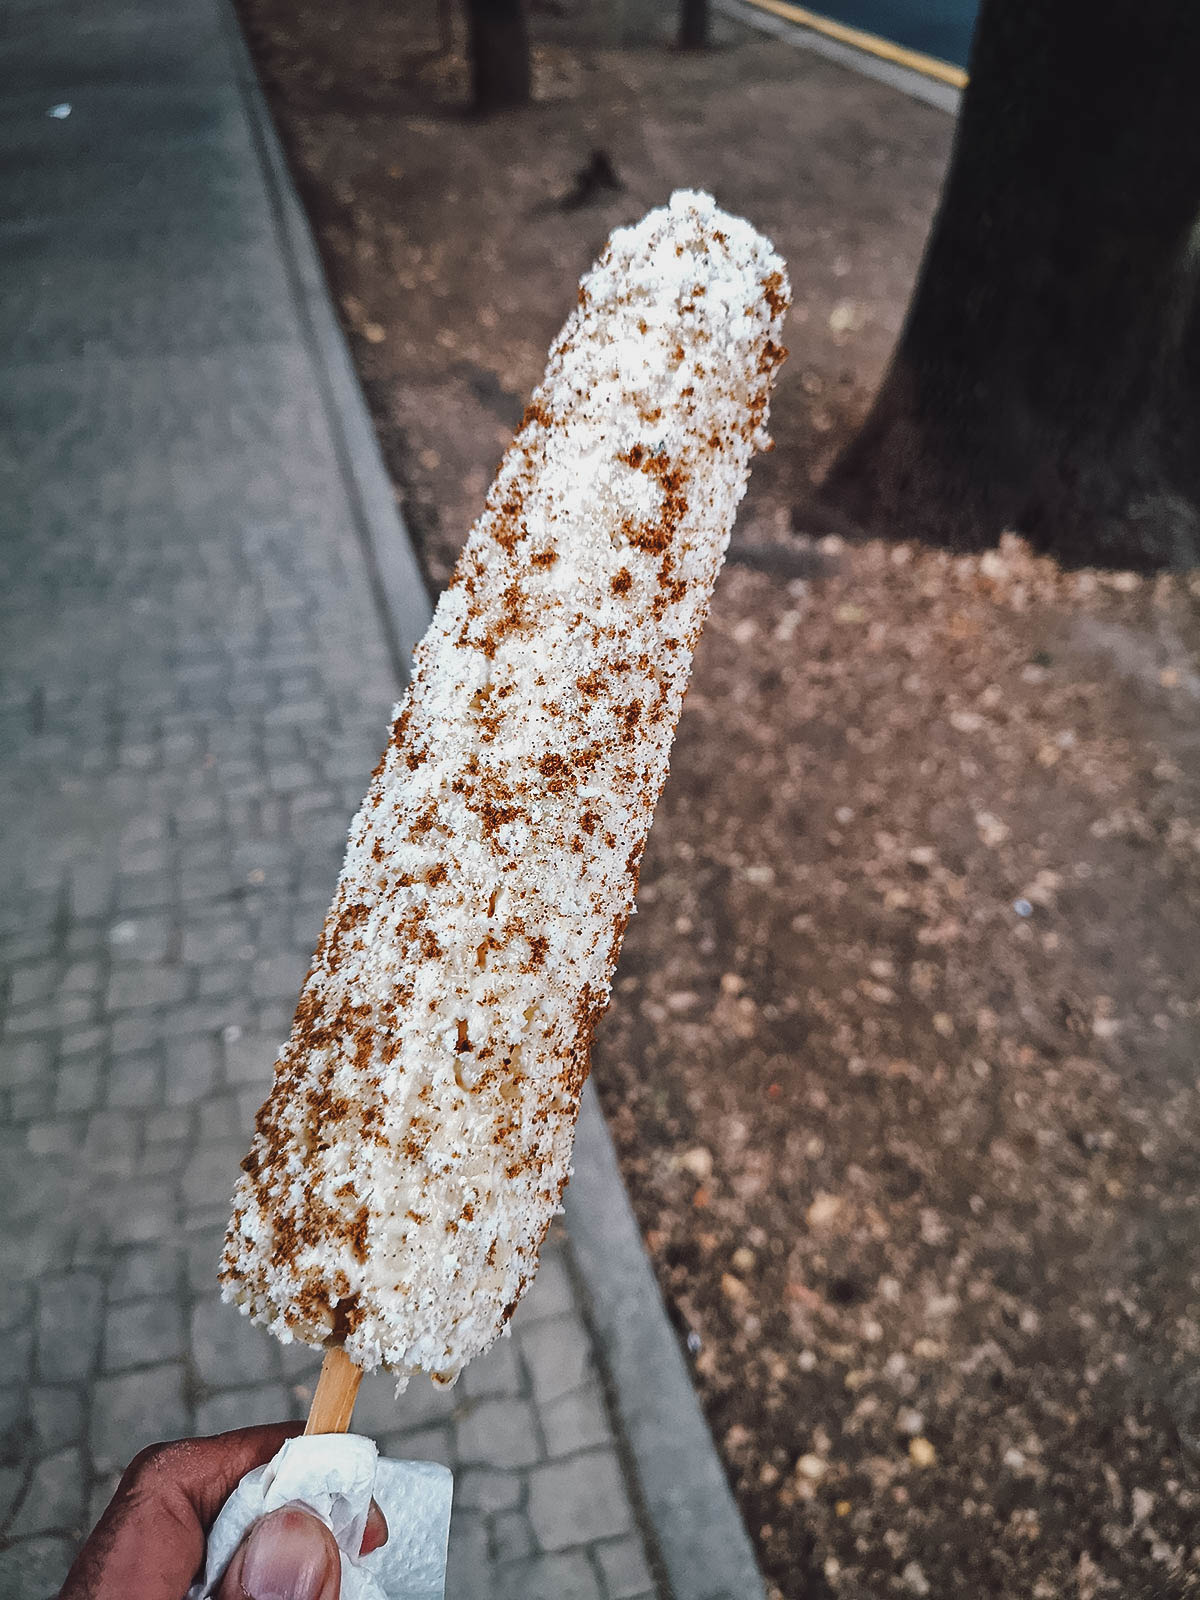 Elote from a street food stand in Mexico City